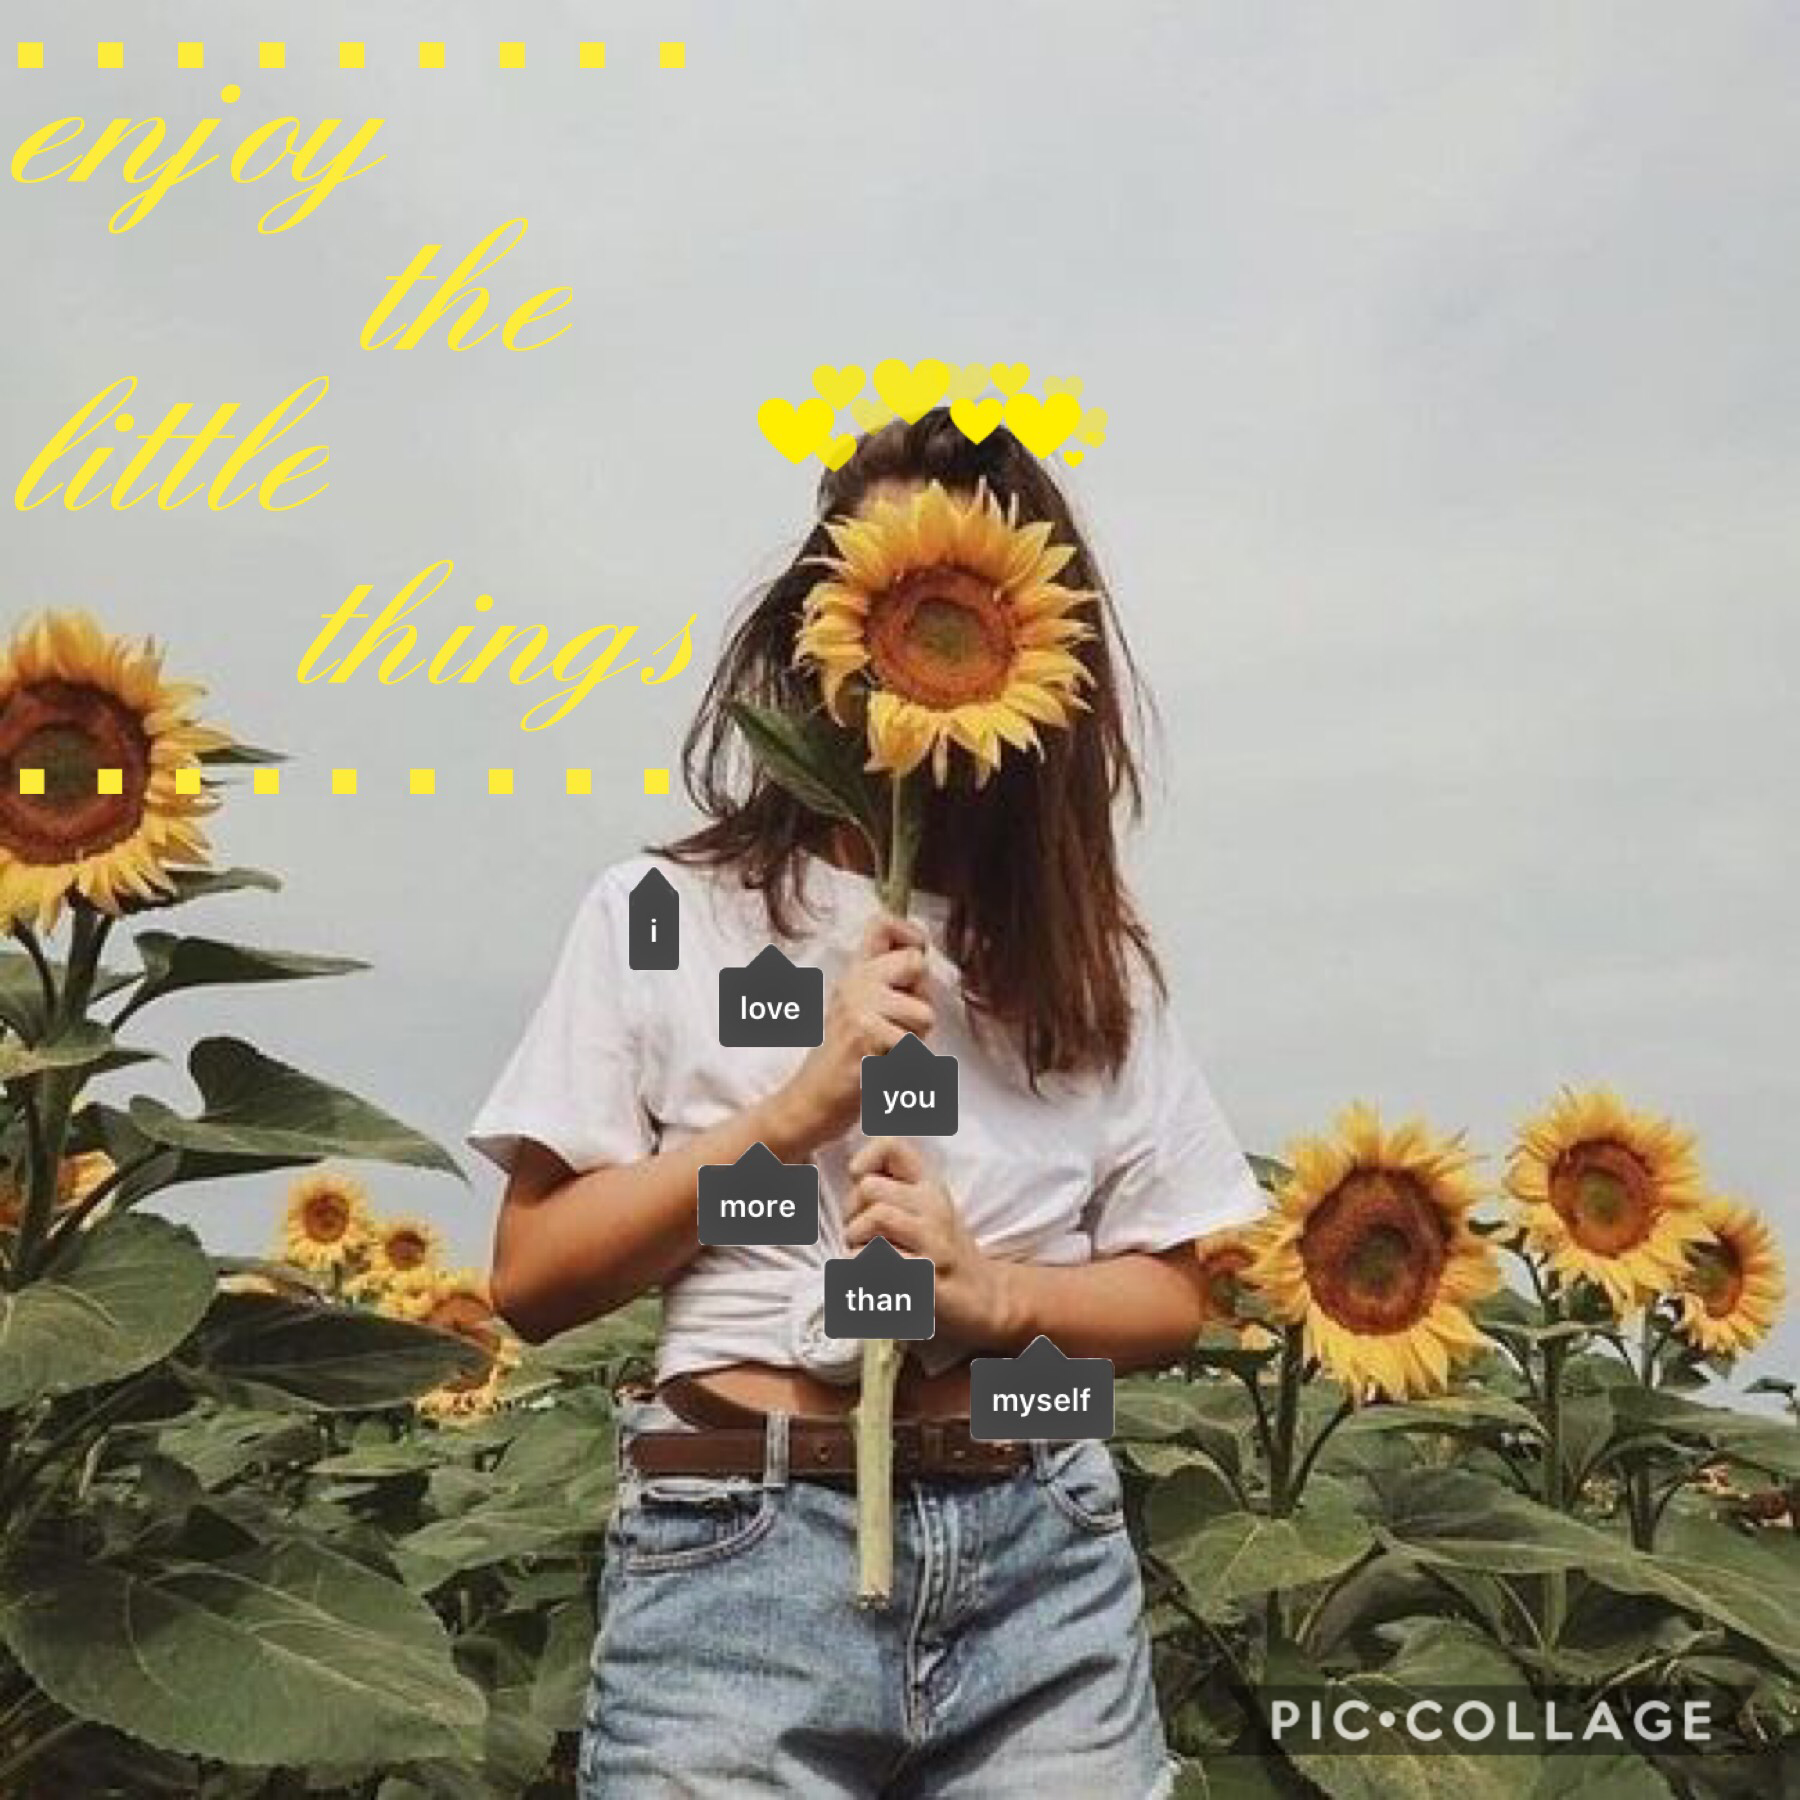 🌻TAP🌻
Omg I’m so proud of myself. This looks amazing and I’m so happy that I can express myself like this 🌻😜💖👑